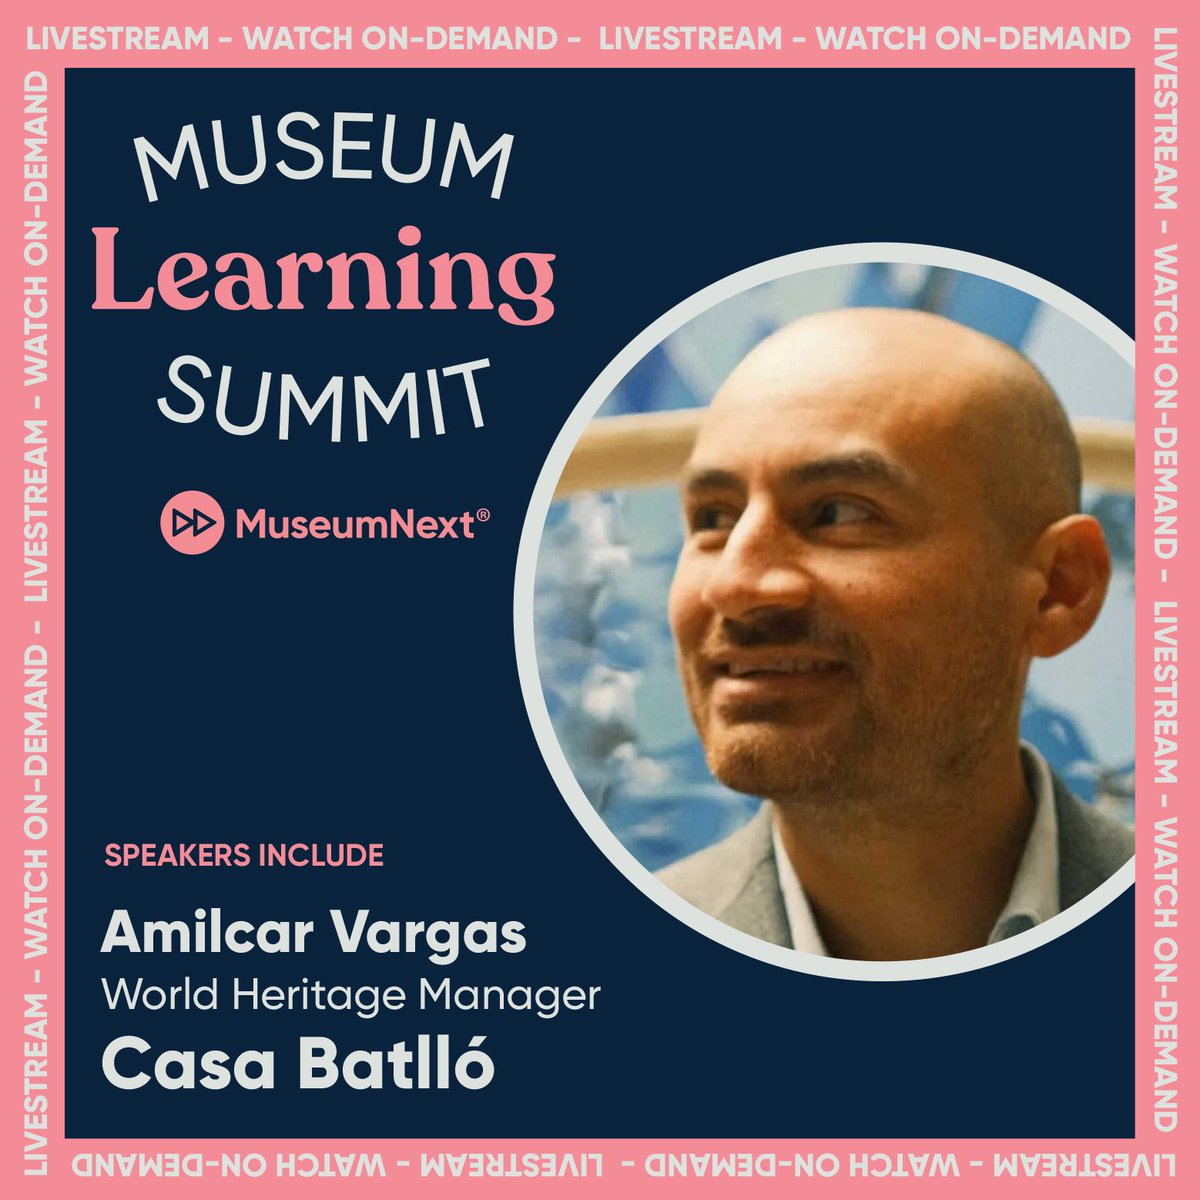 We've started to announce speakers for the #museum learning summit in July